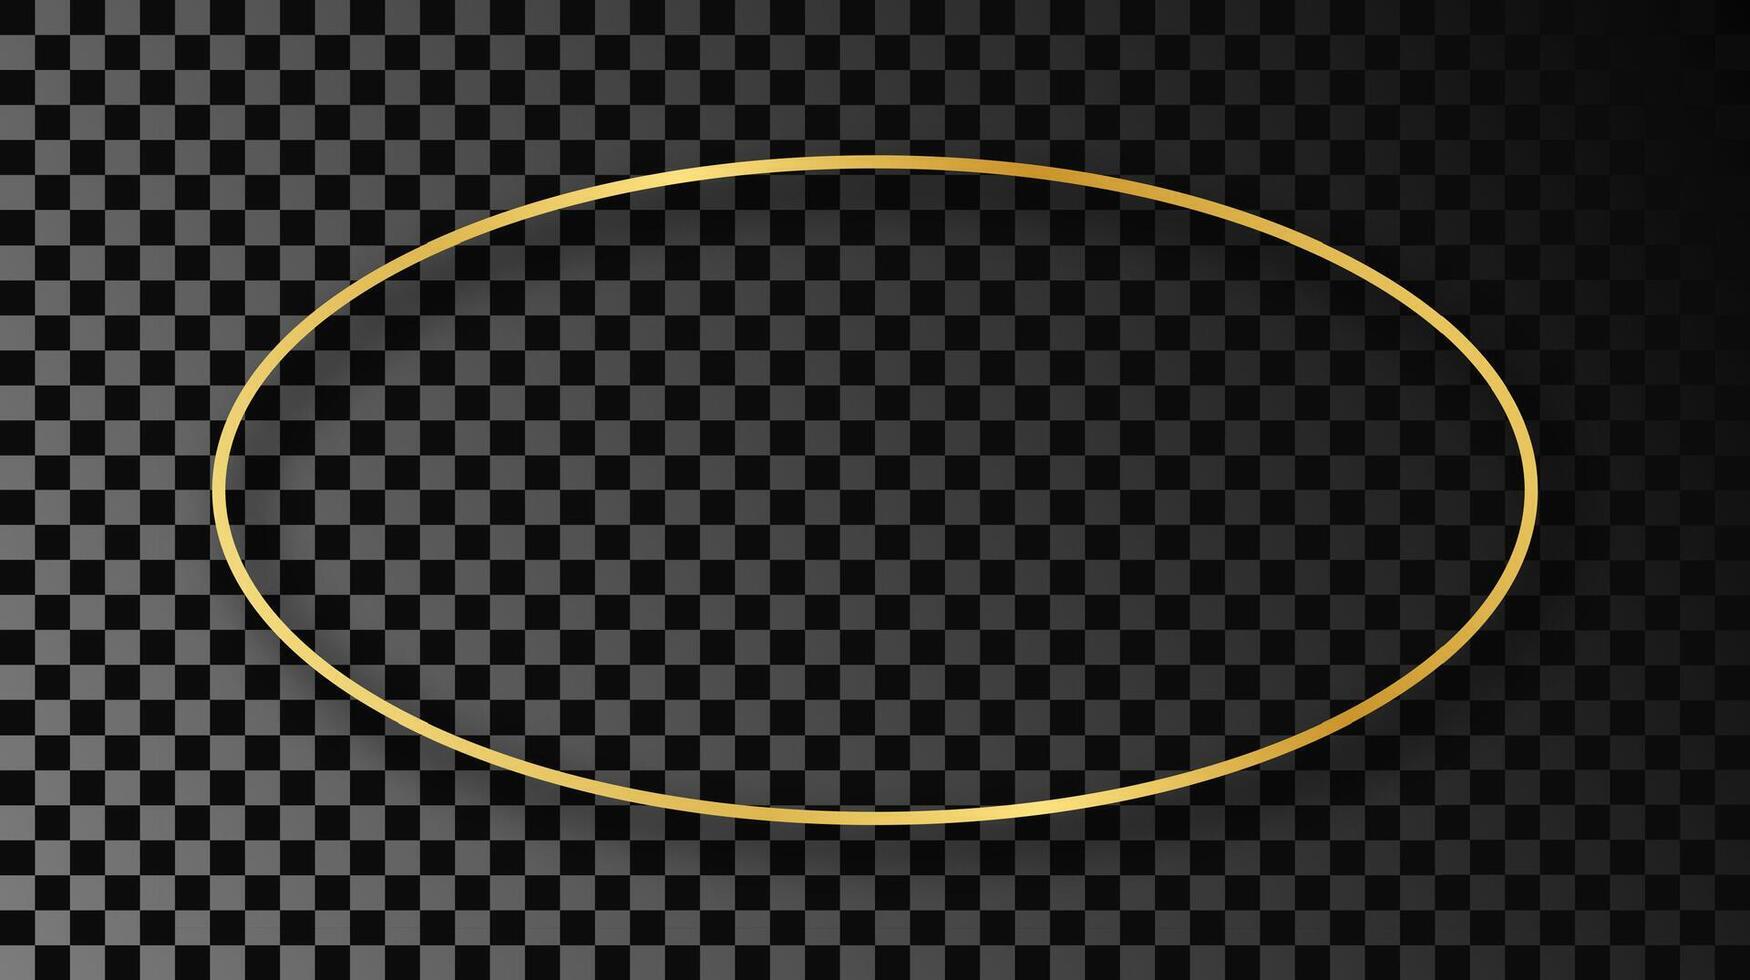 Gold glowing oval shape frame with shadow isolated on dark background. Shiny frame with glowing effects. Vector illustration.